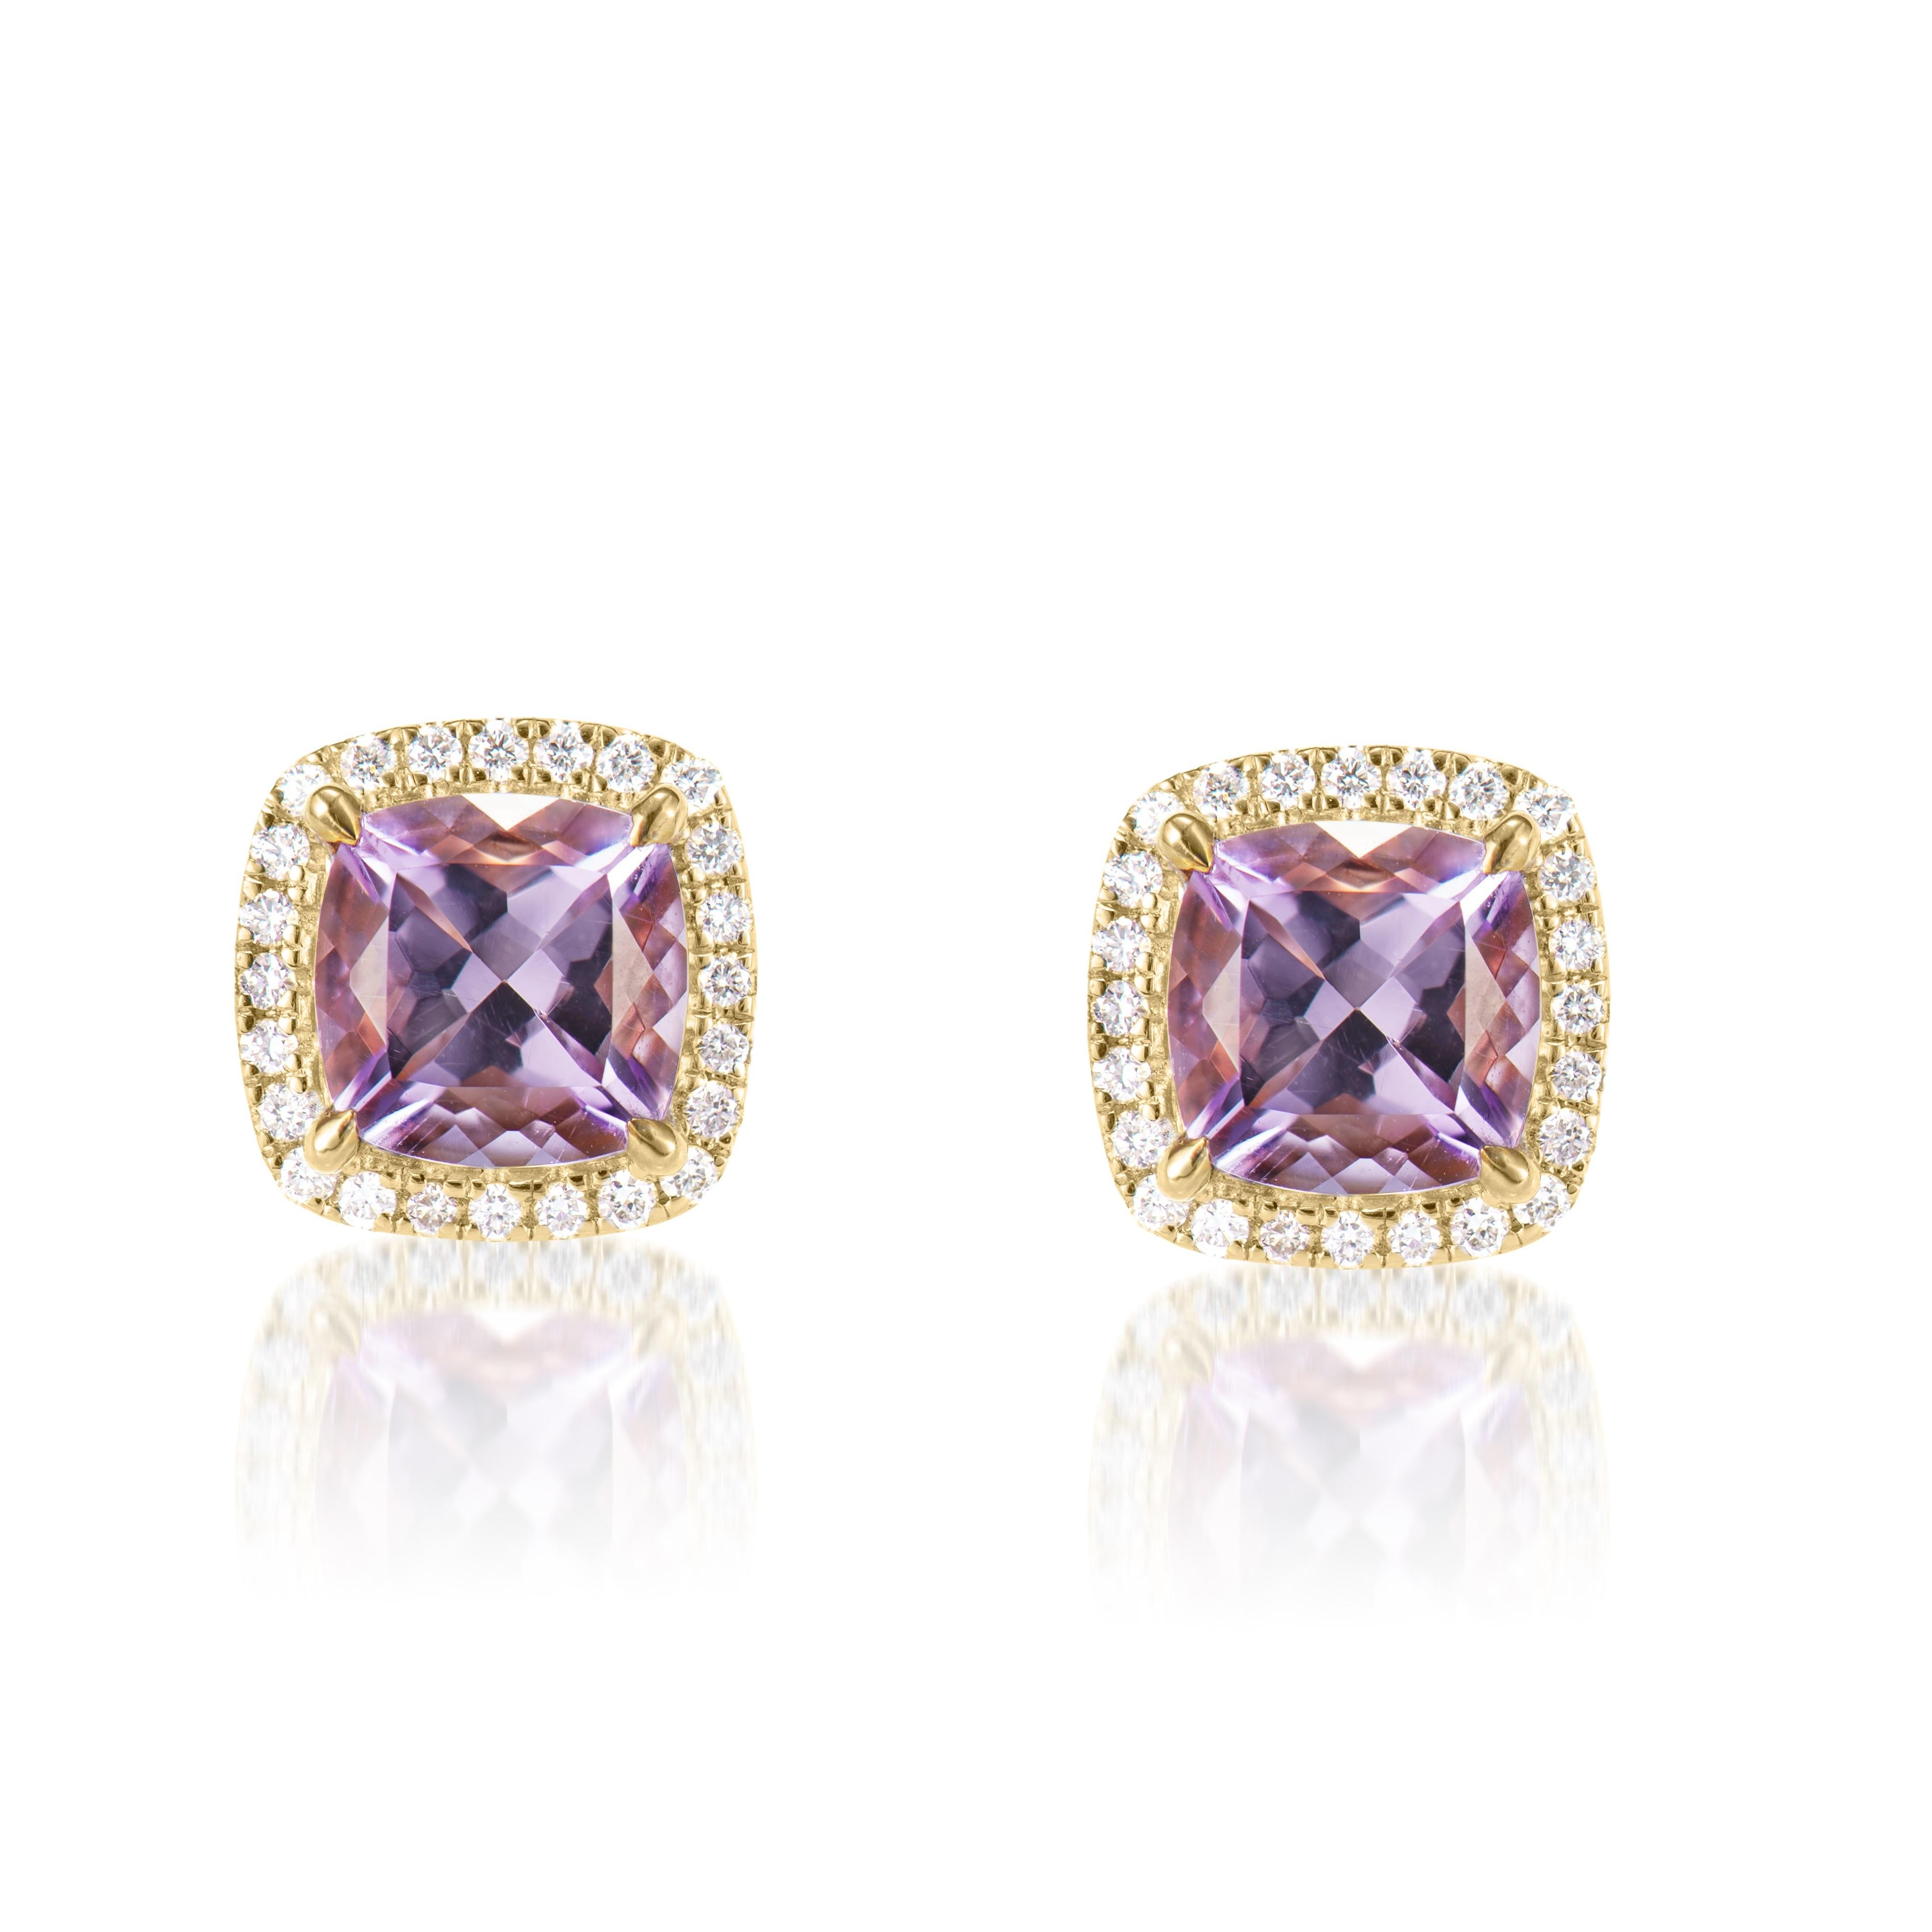 Contemporary 1.76 Carat Amethyst Stud Earrings in 18Karat Yellow Gold with White Diamond. For Sale